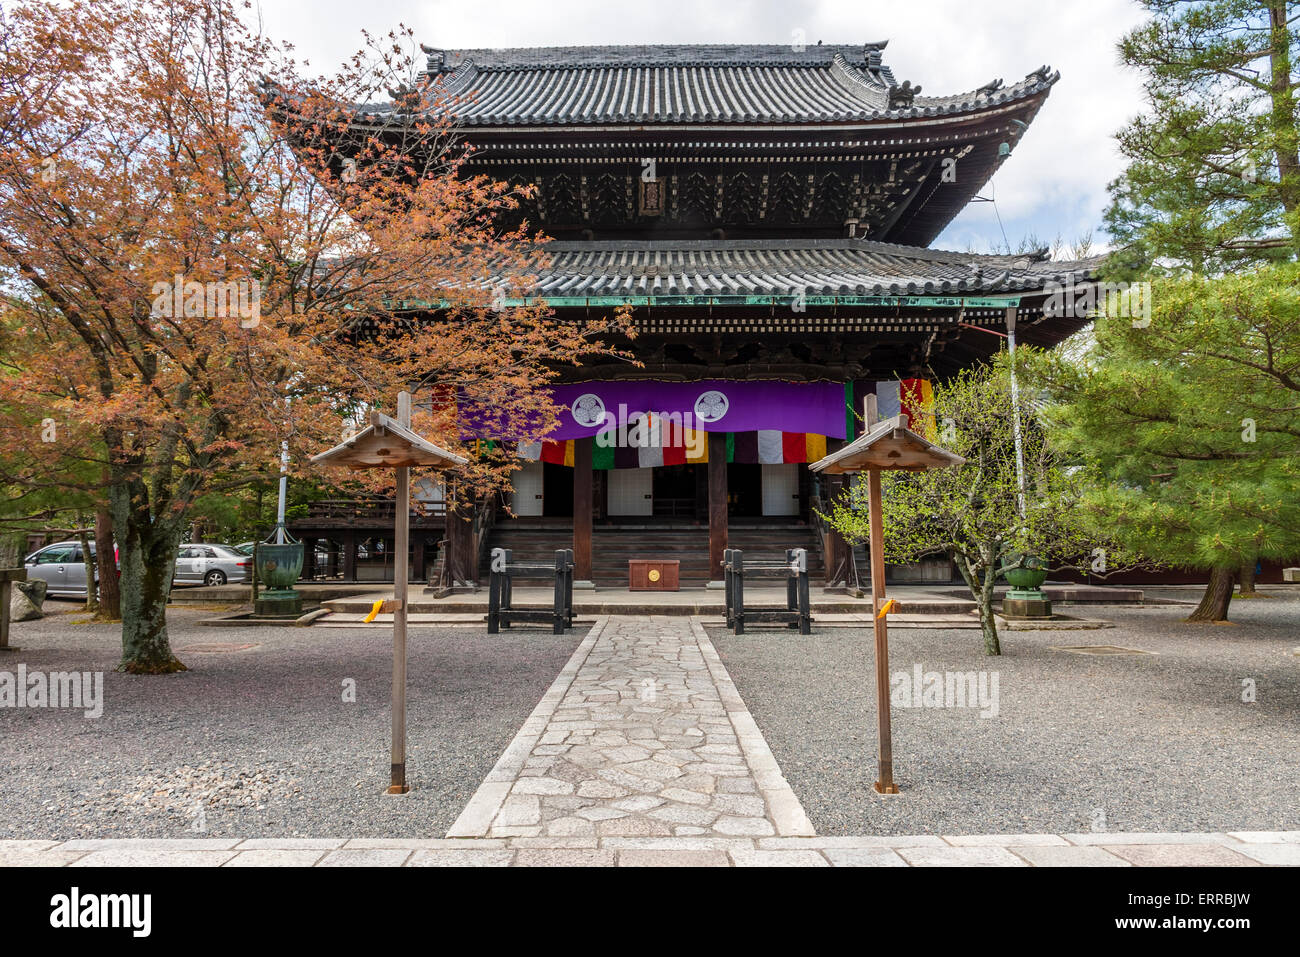 The Hobutsu-den hall at the Chion-in temple in Kyoto. Path leading to the two story hall with purple banners for Tokugawa Aoi hanging from the eaves, Stock Photo